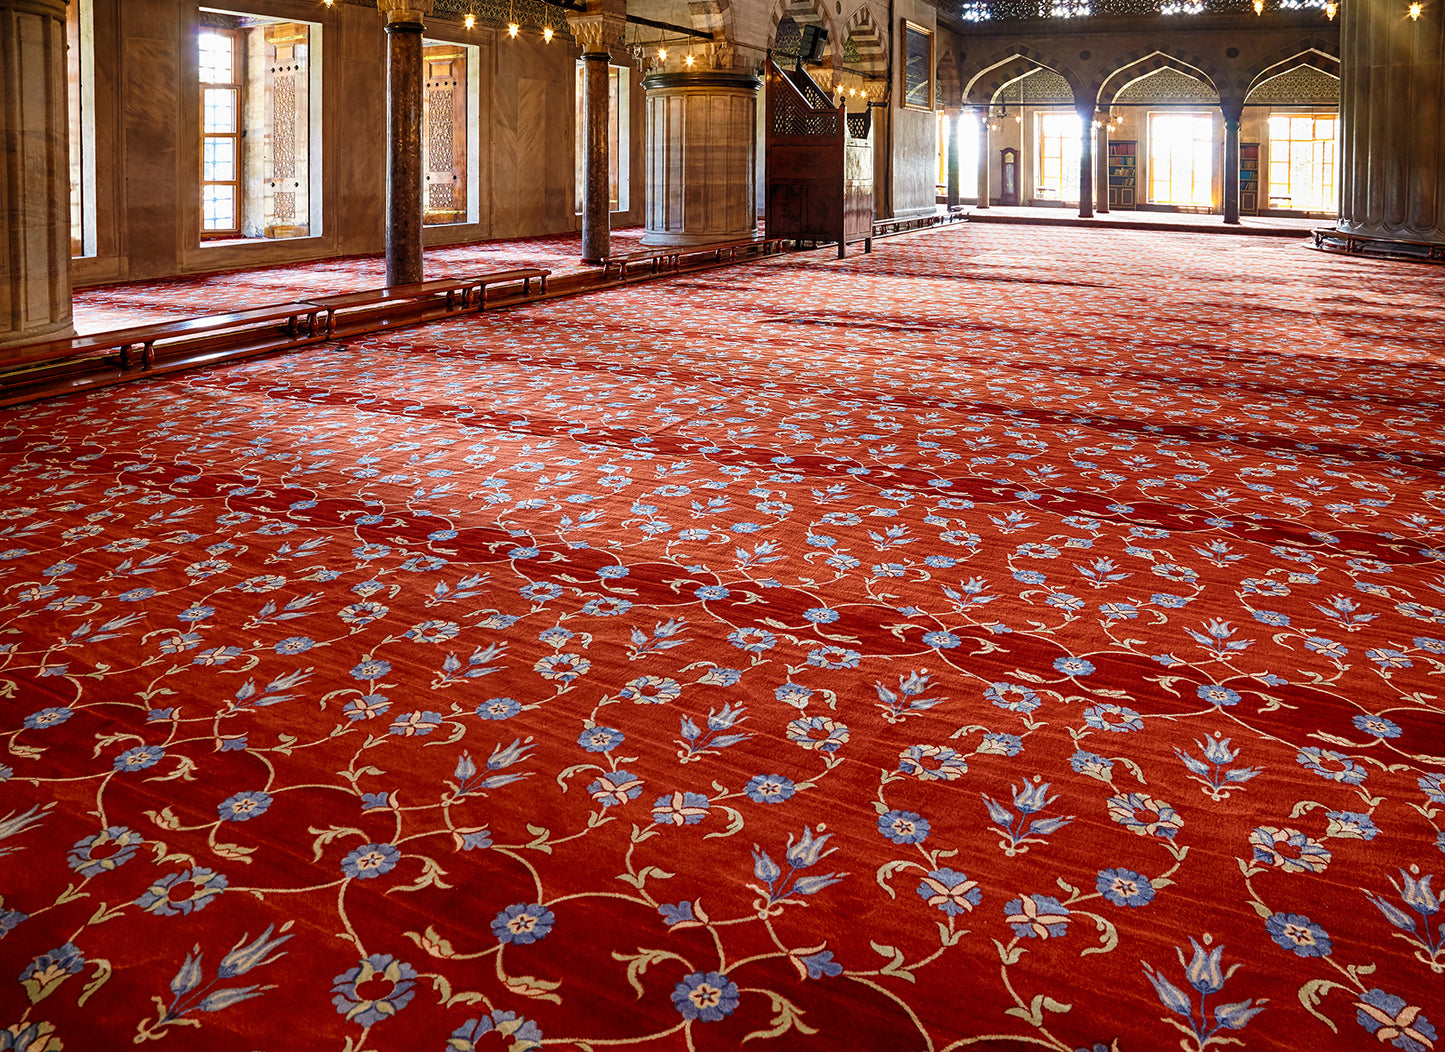 ISTANBUL BLUE MOSQUE Red Floral Mosque & Masjid Carpet